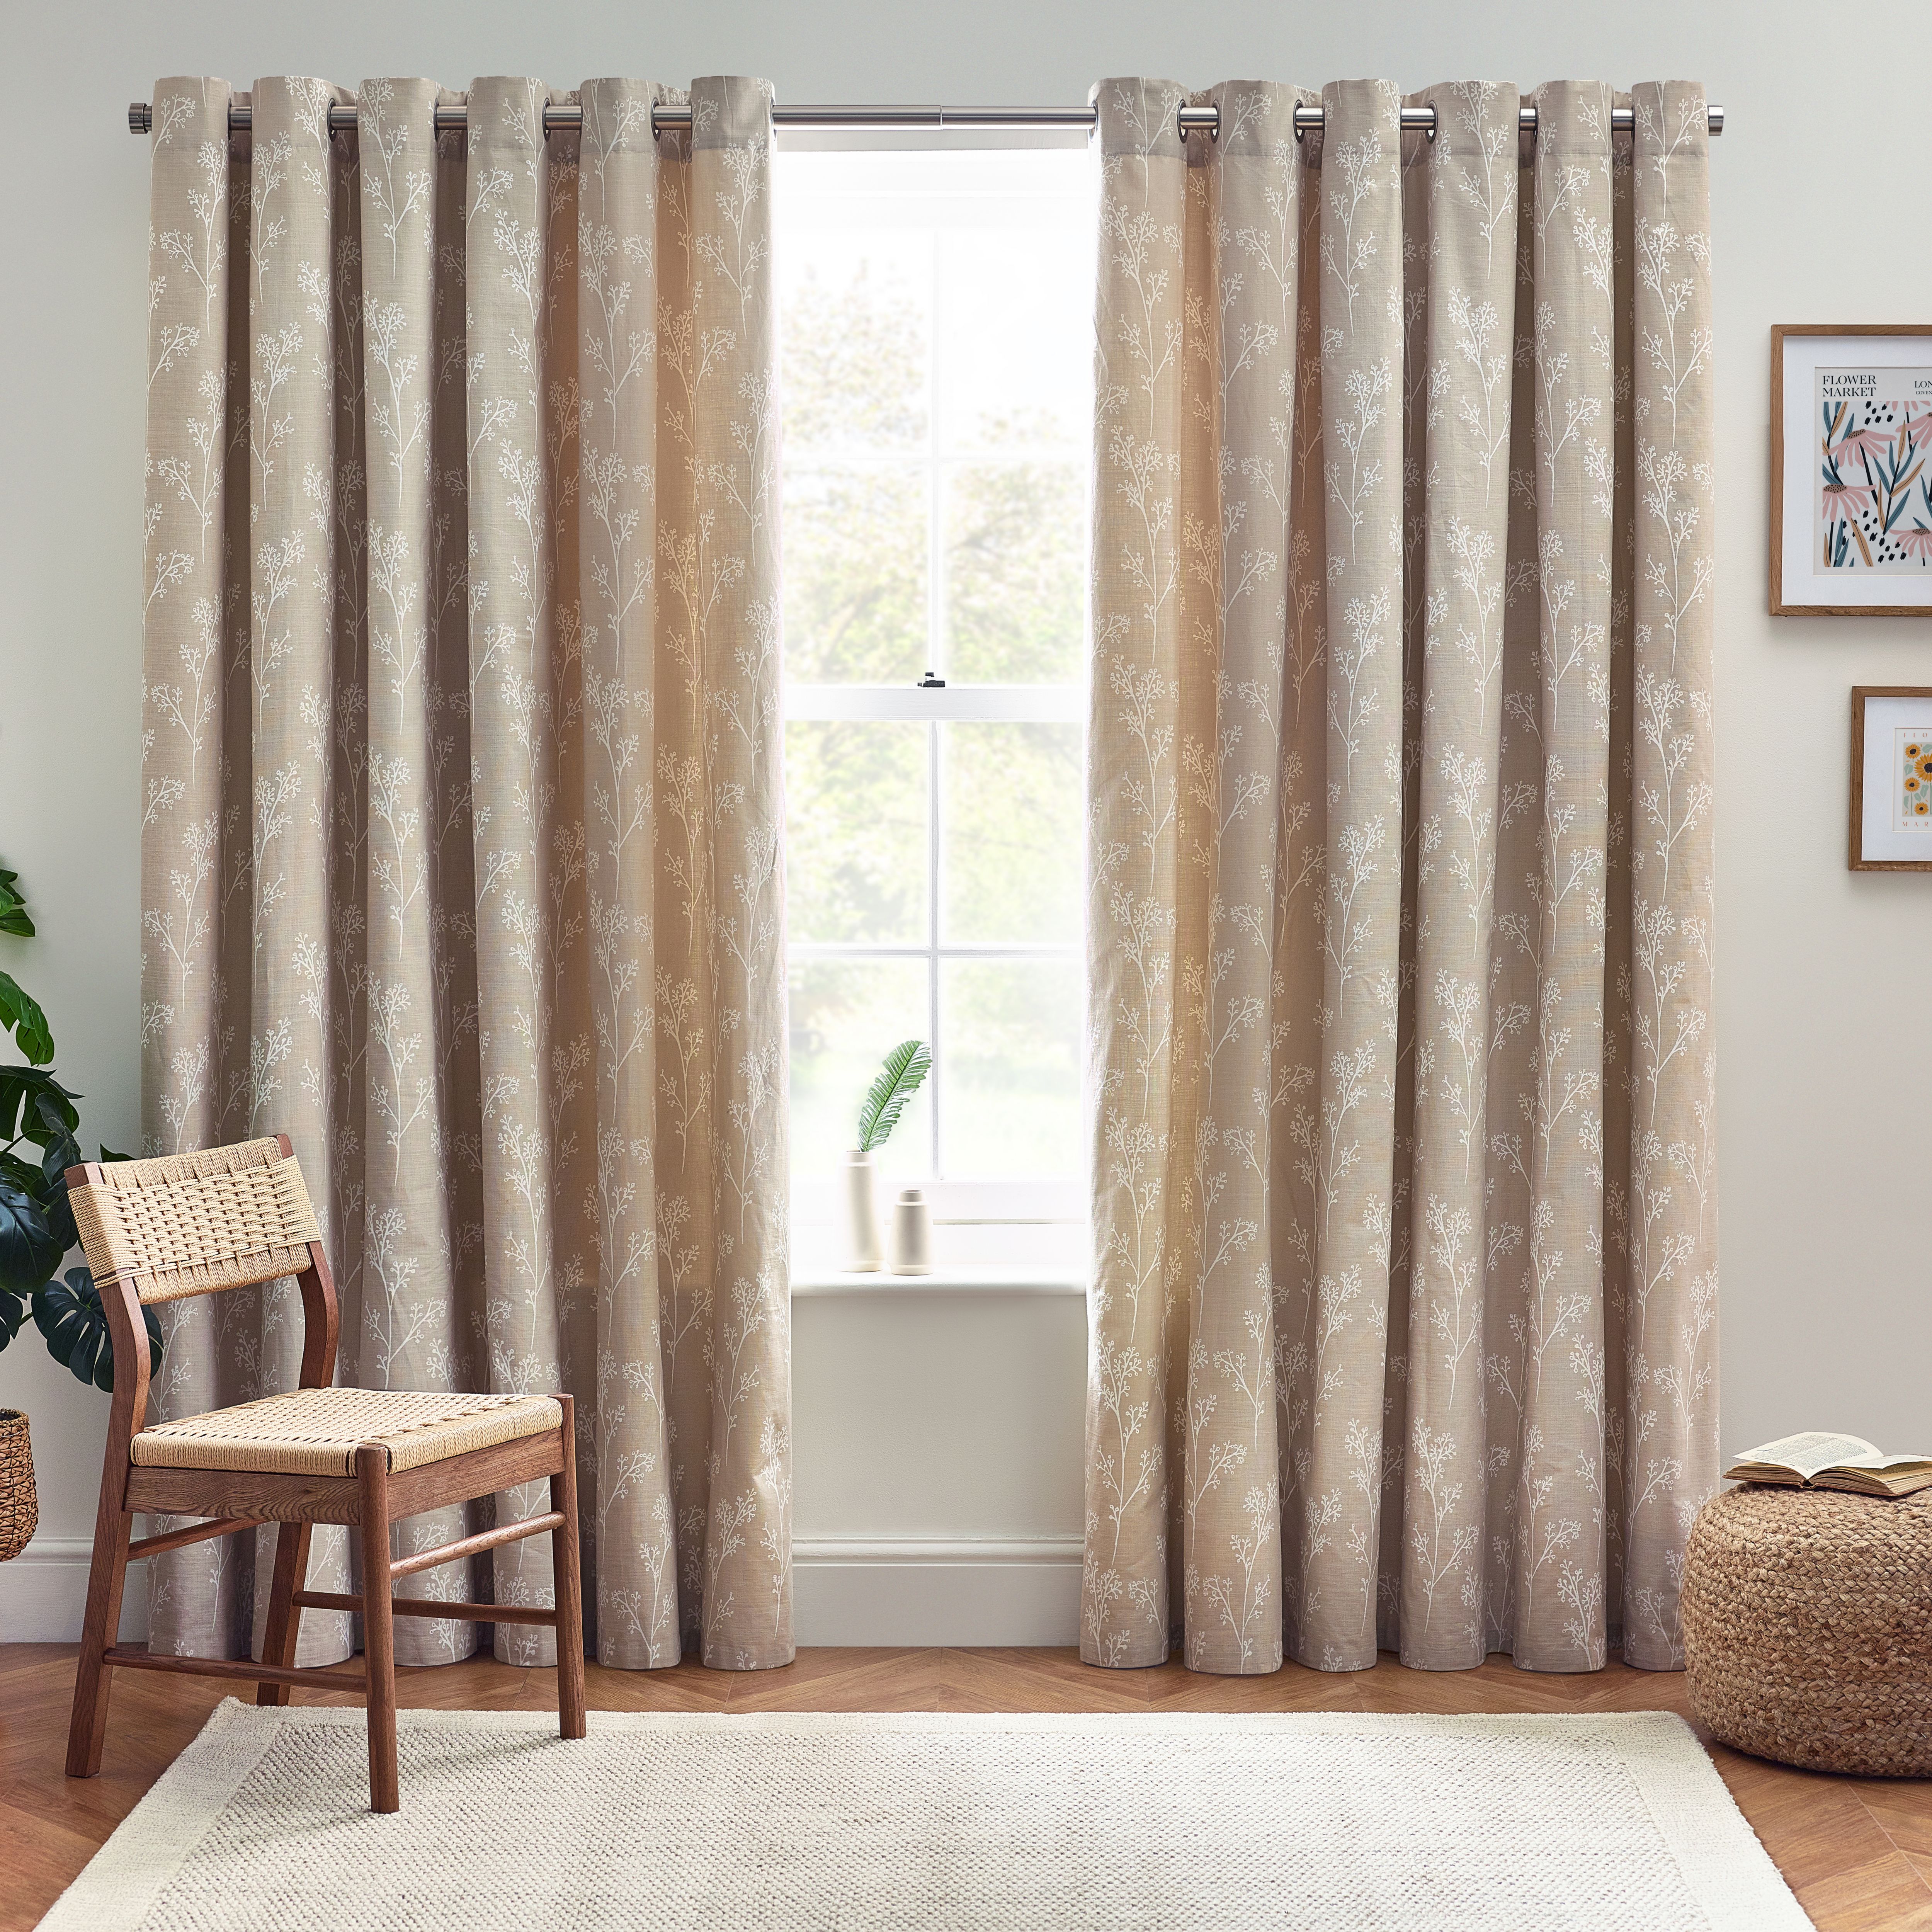 Taupe & White Floral Lined Eyelet Curtains (W)228cm (L)228cm, Pair ...